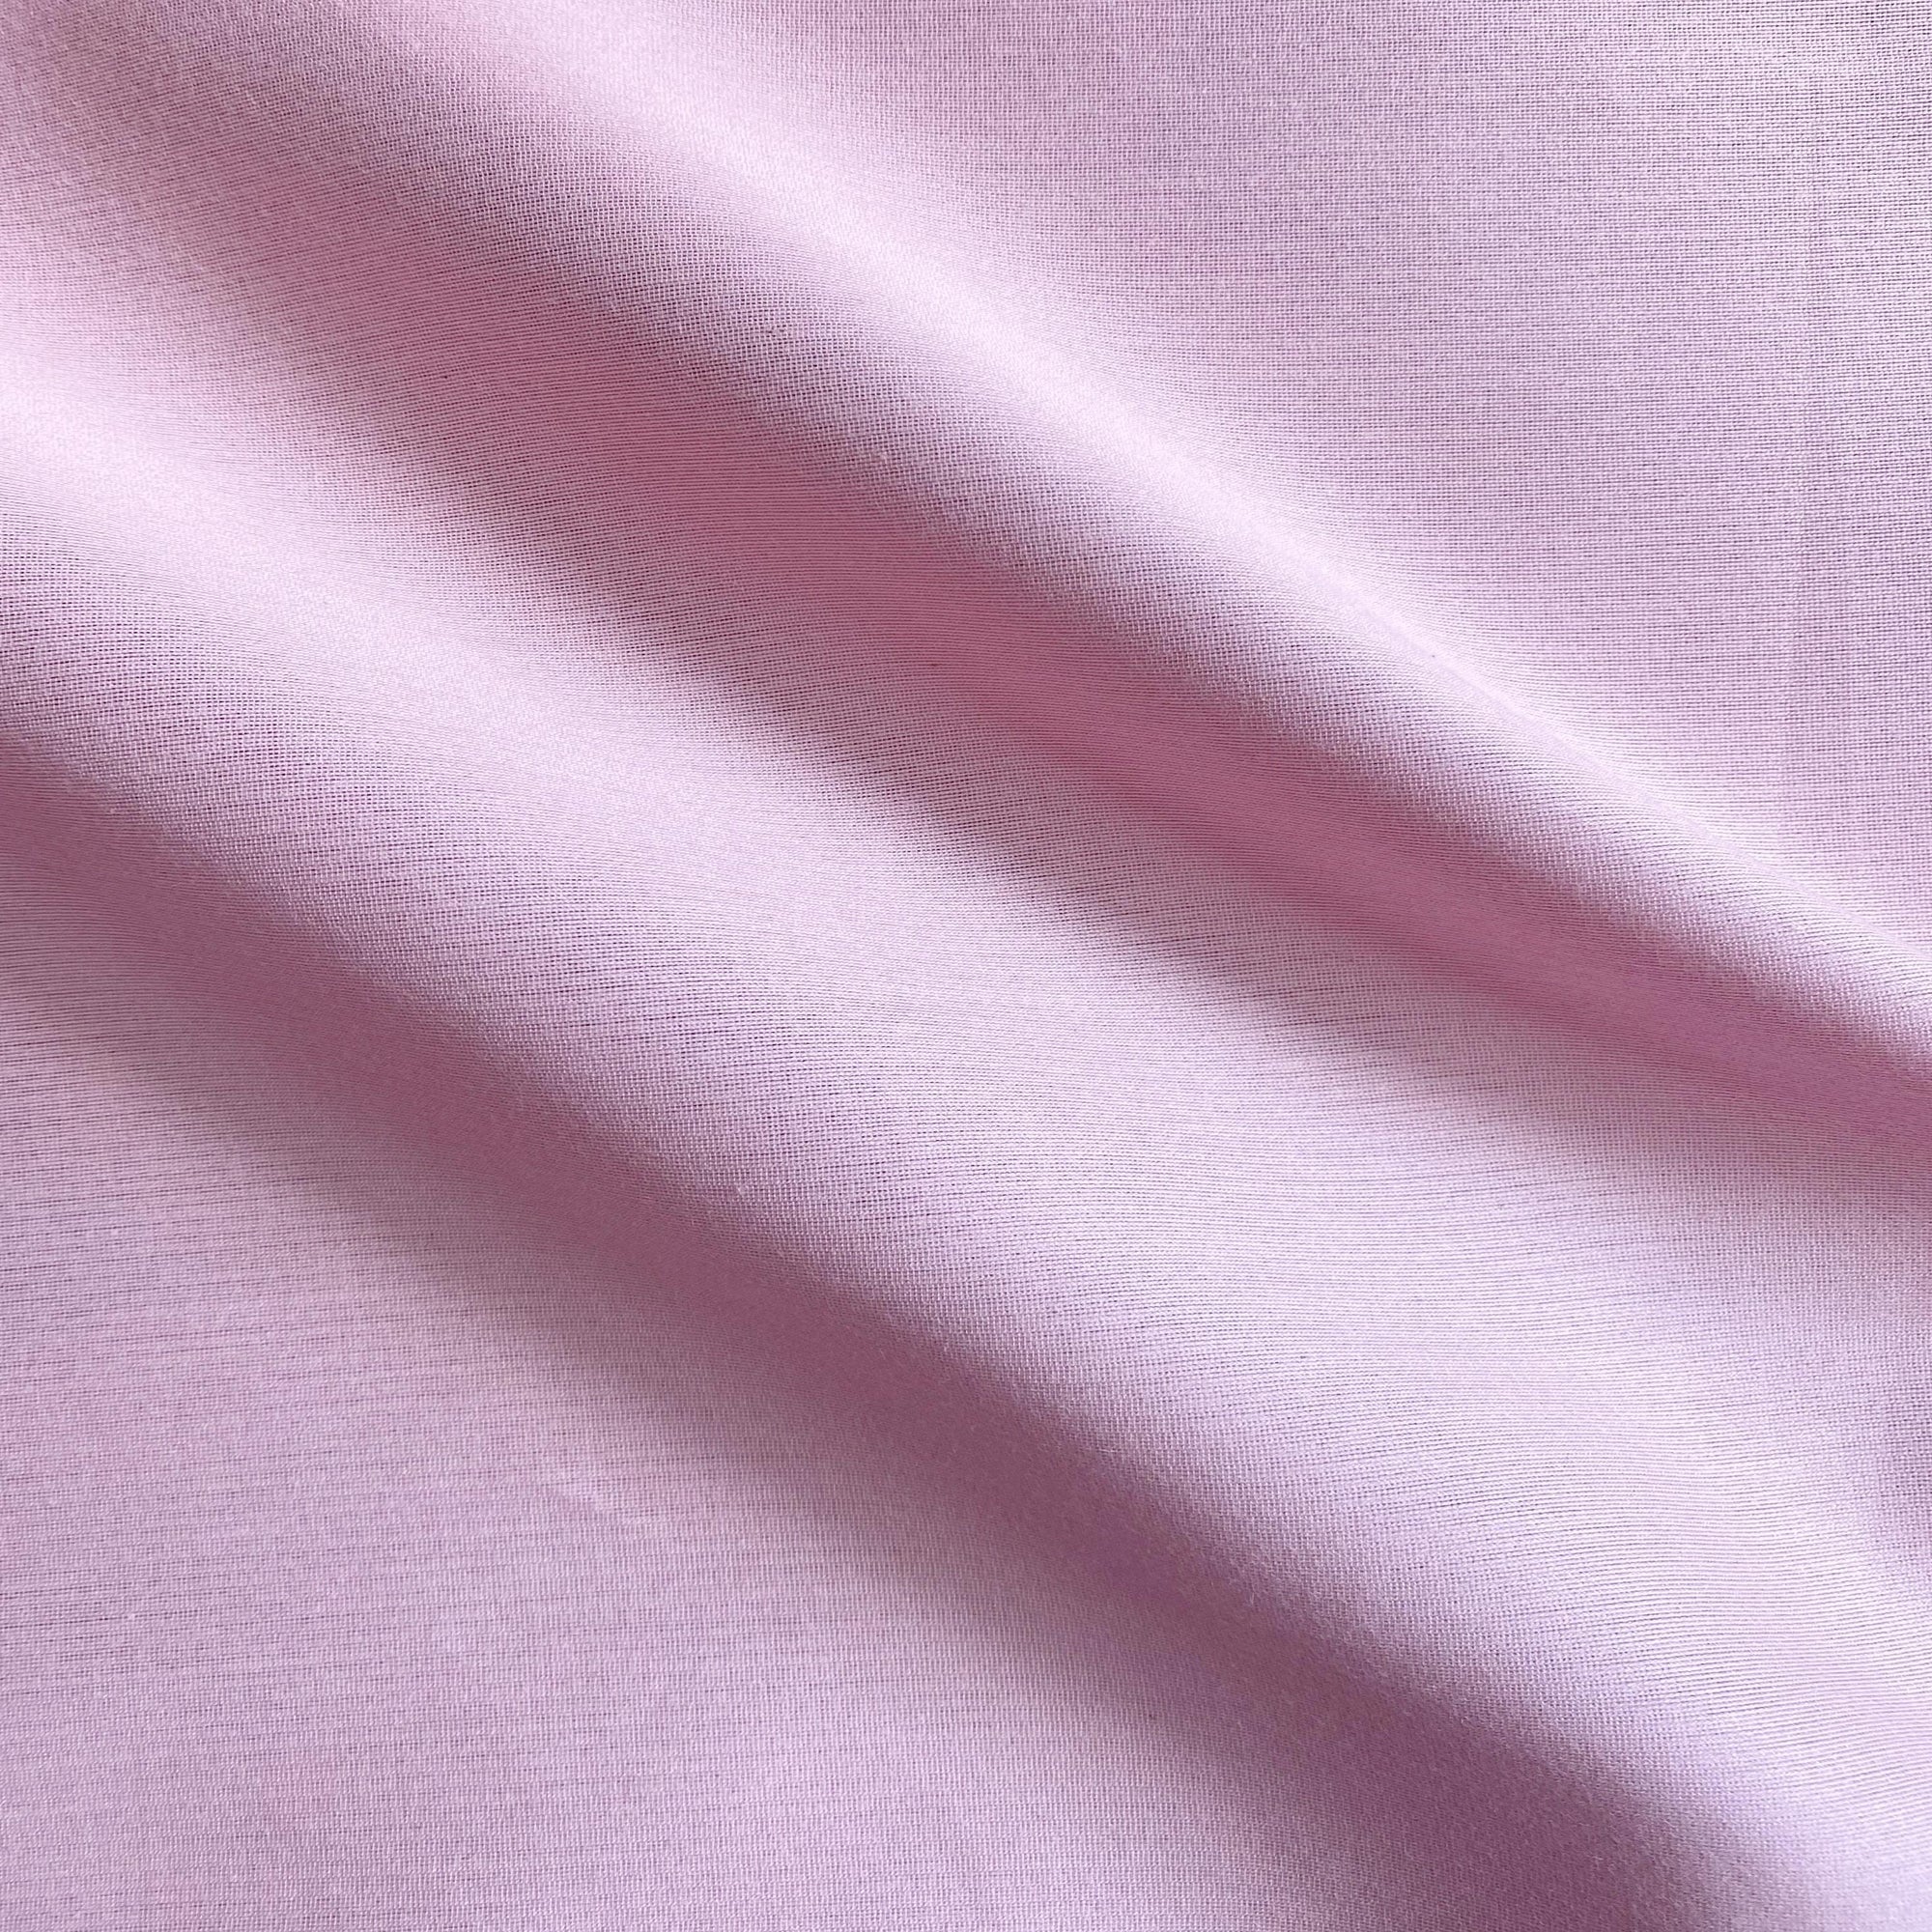 Silk blend fabric with texture and versatility. A modern take on silk dupioni.